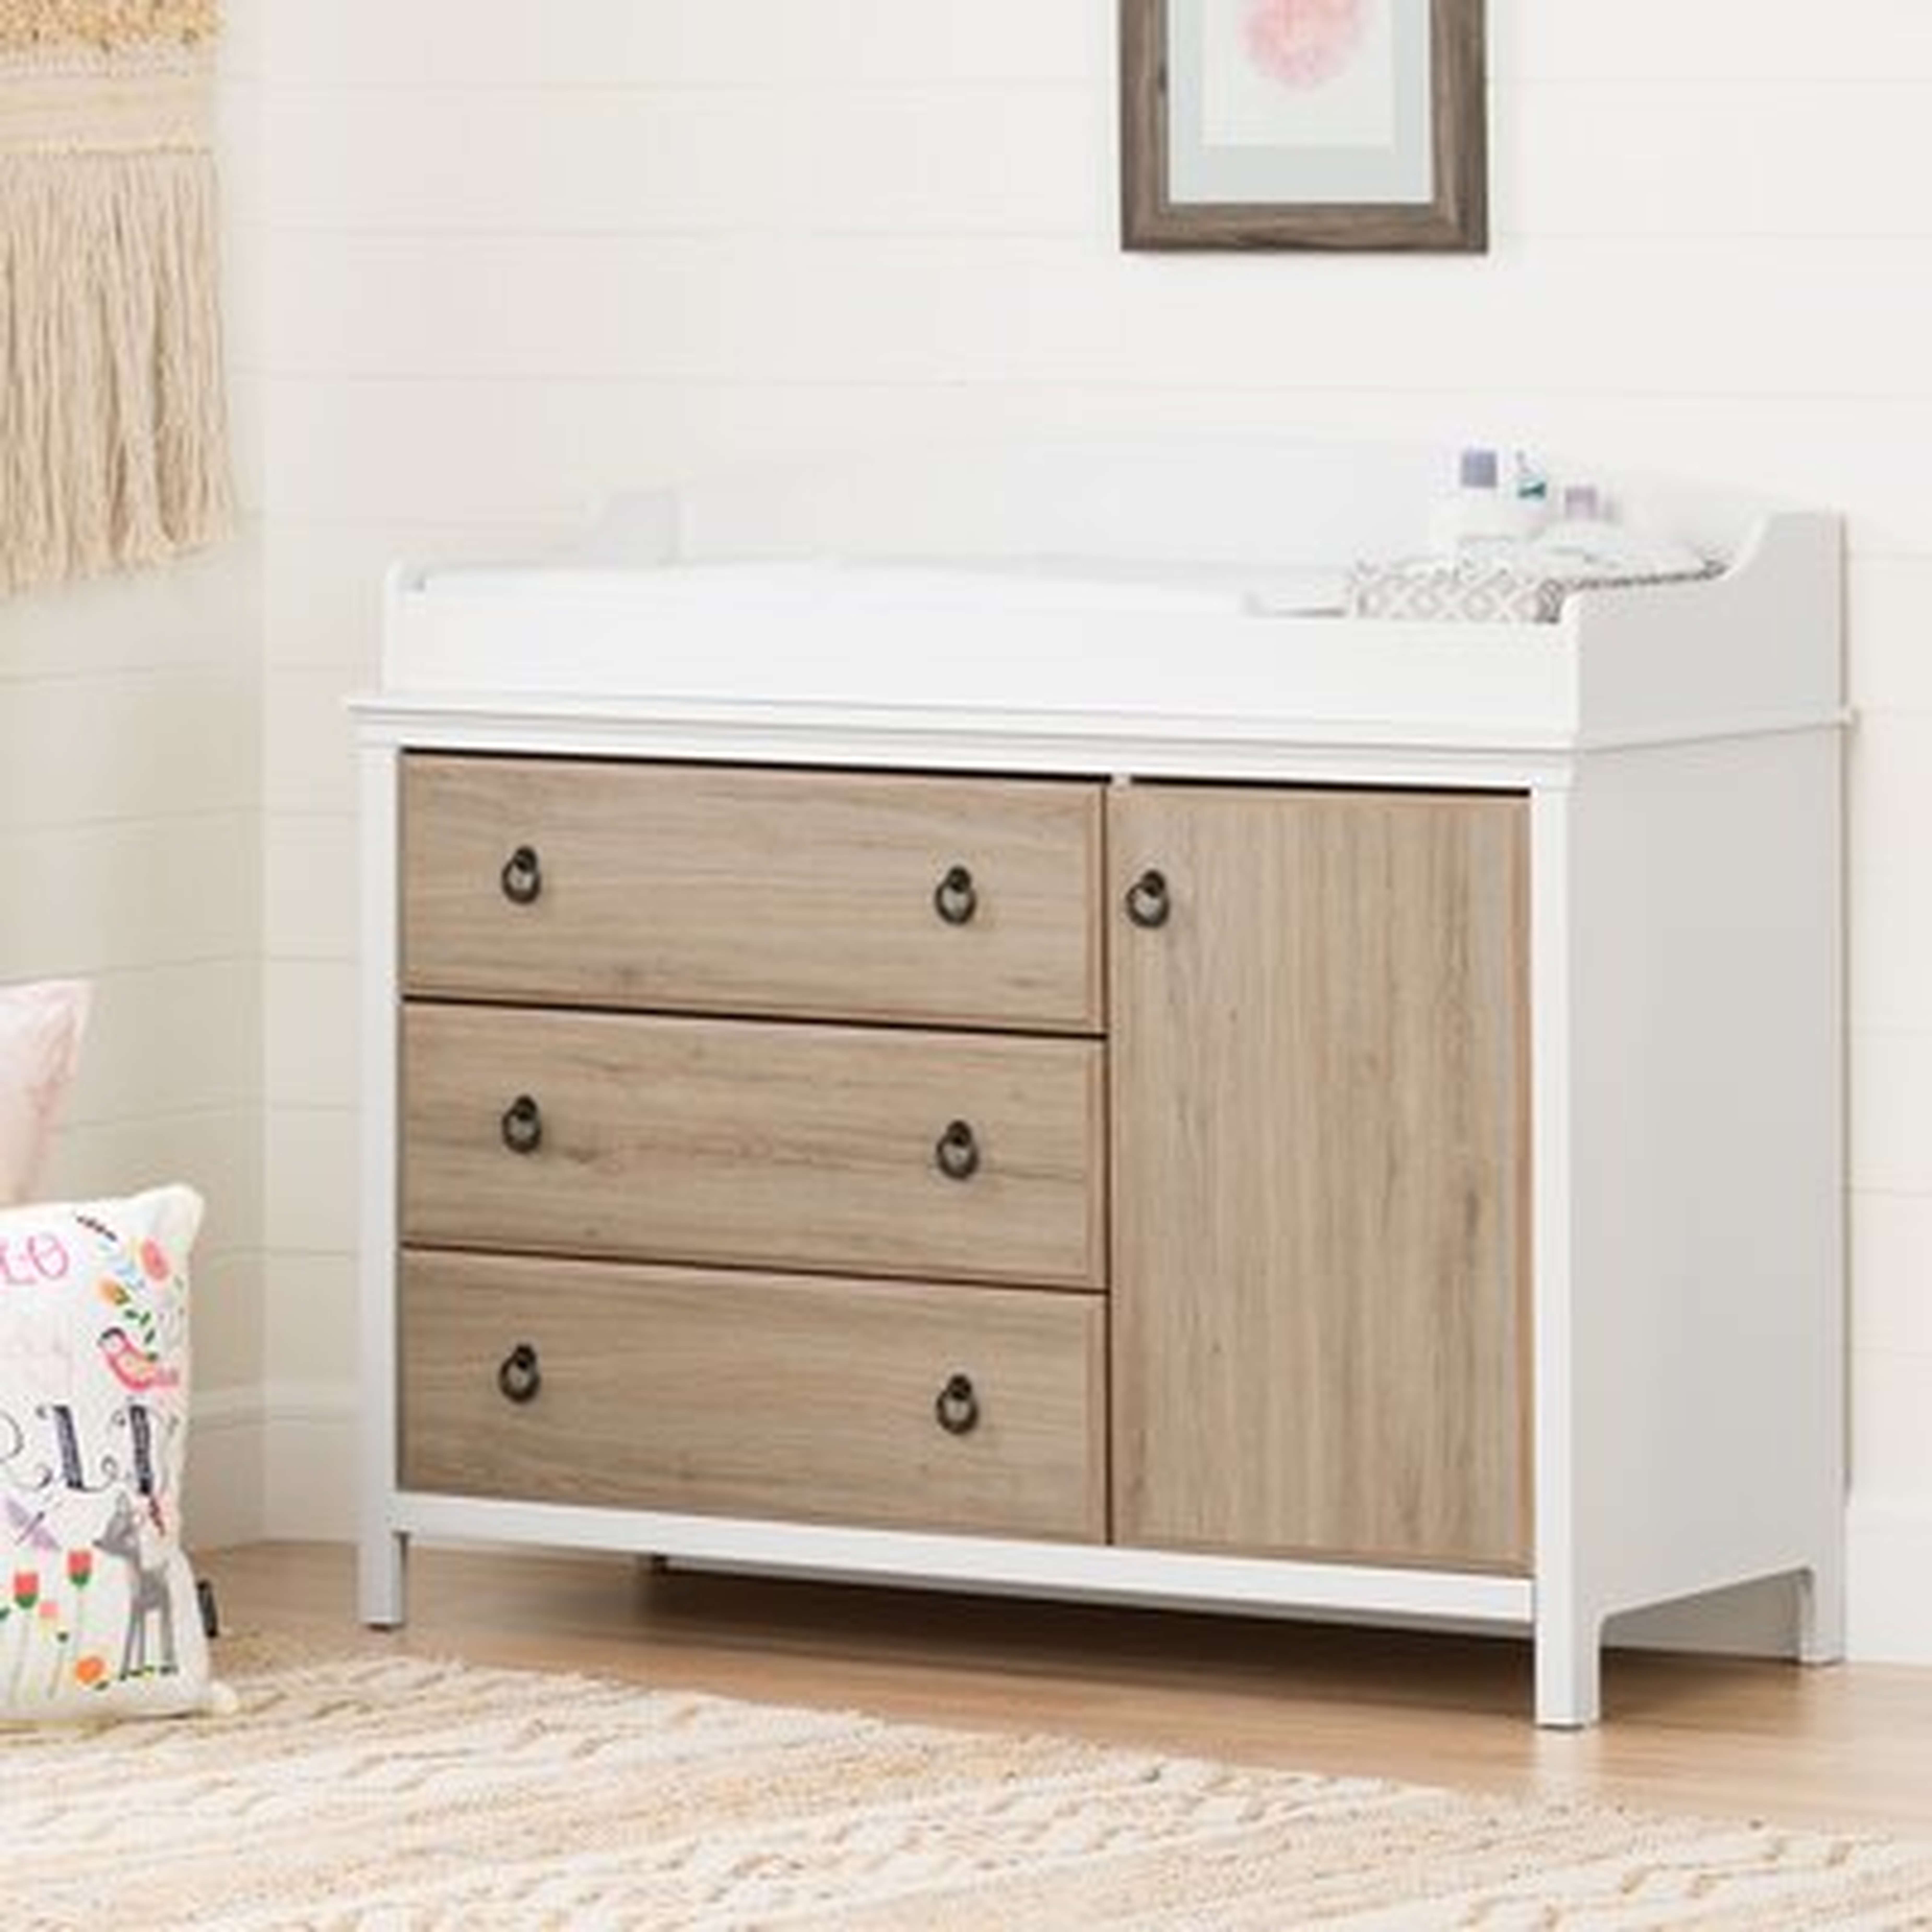 Cotton Candy Changing Table Dresser - Wayfair